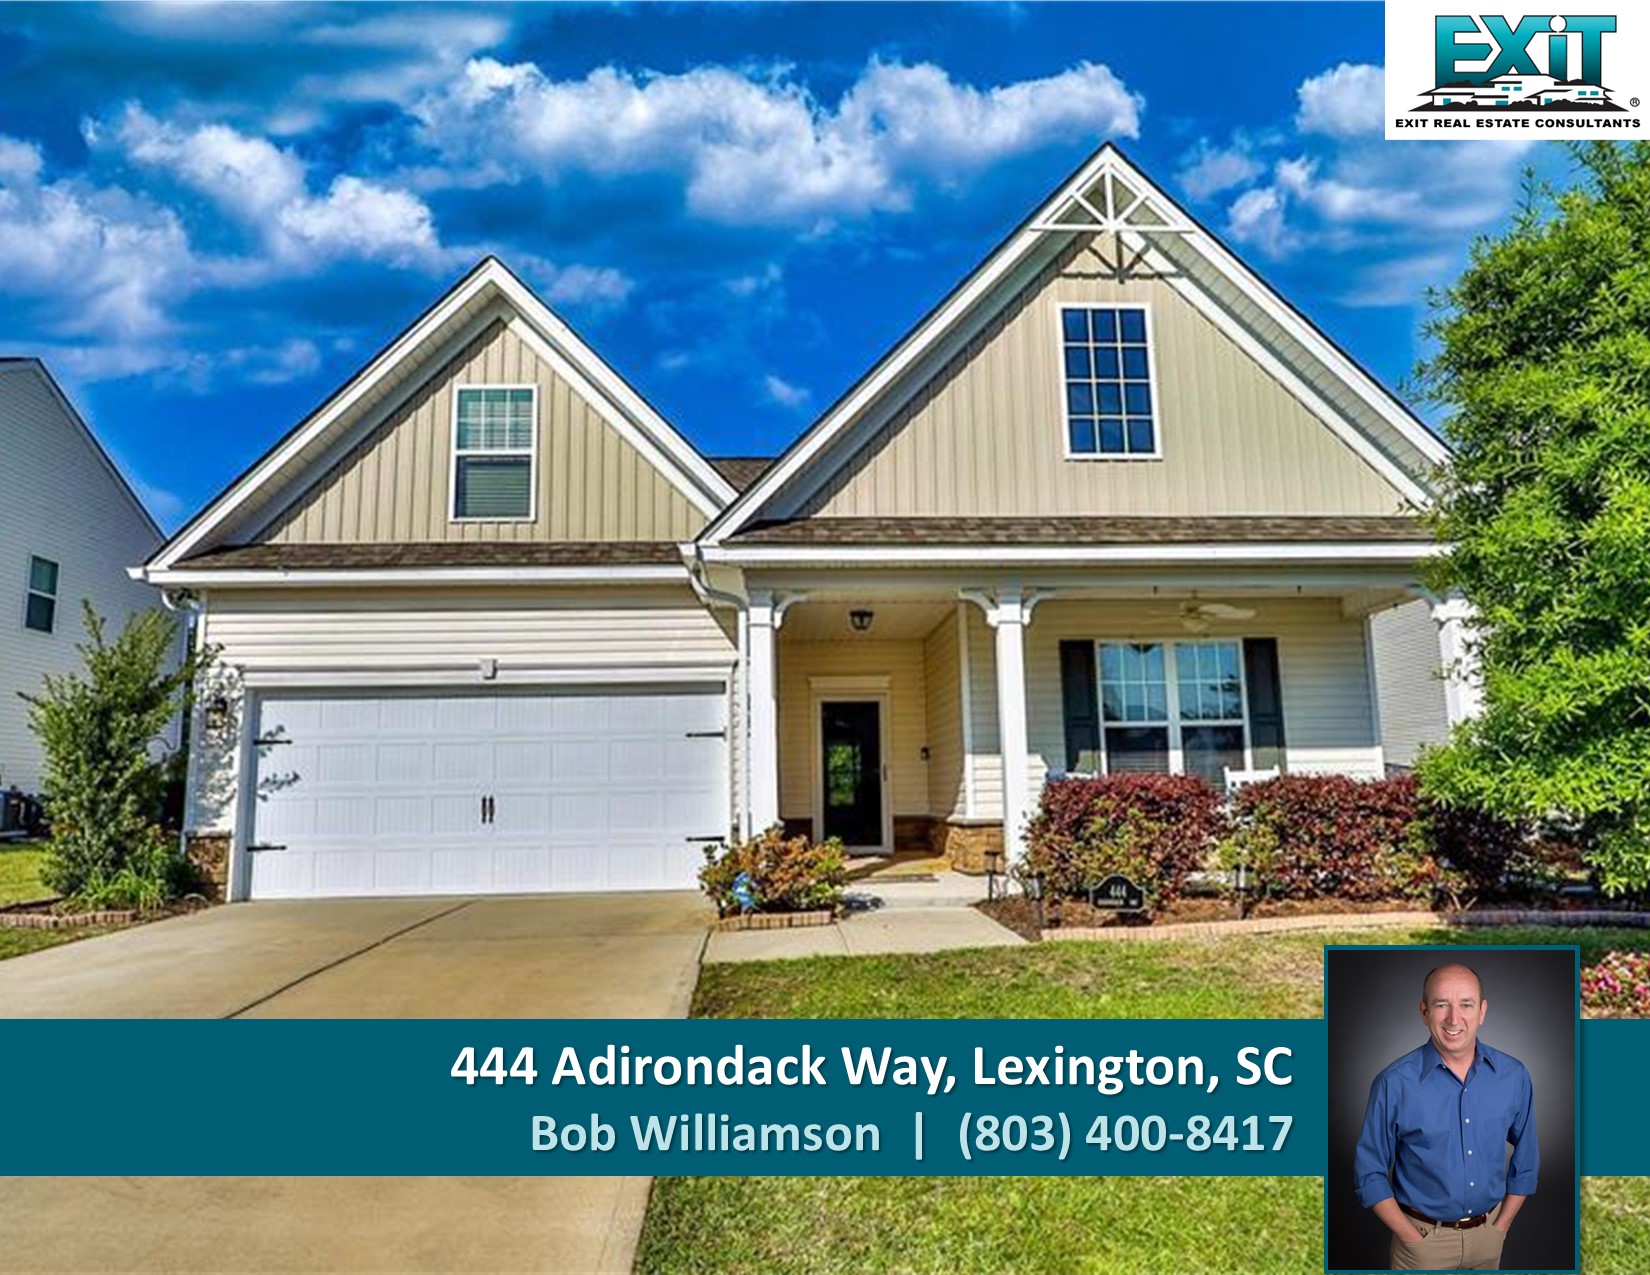 Just listed in the Landings at Longview